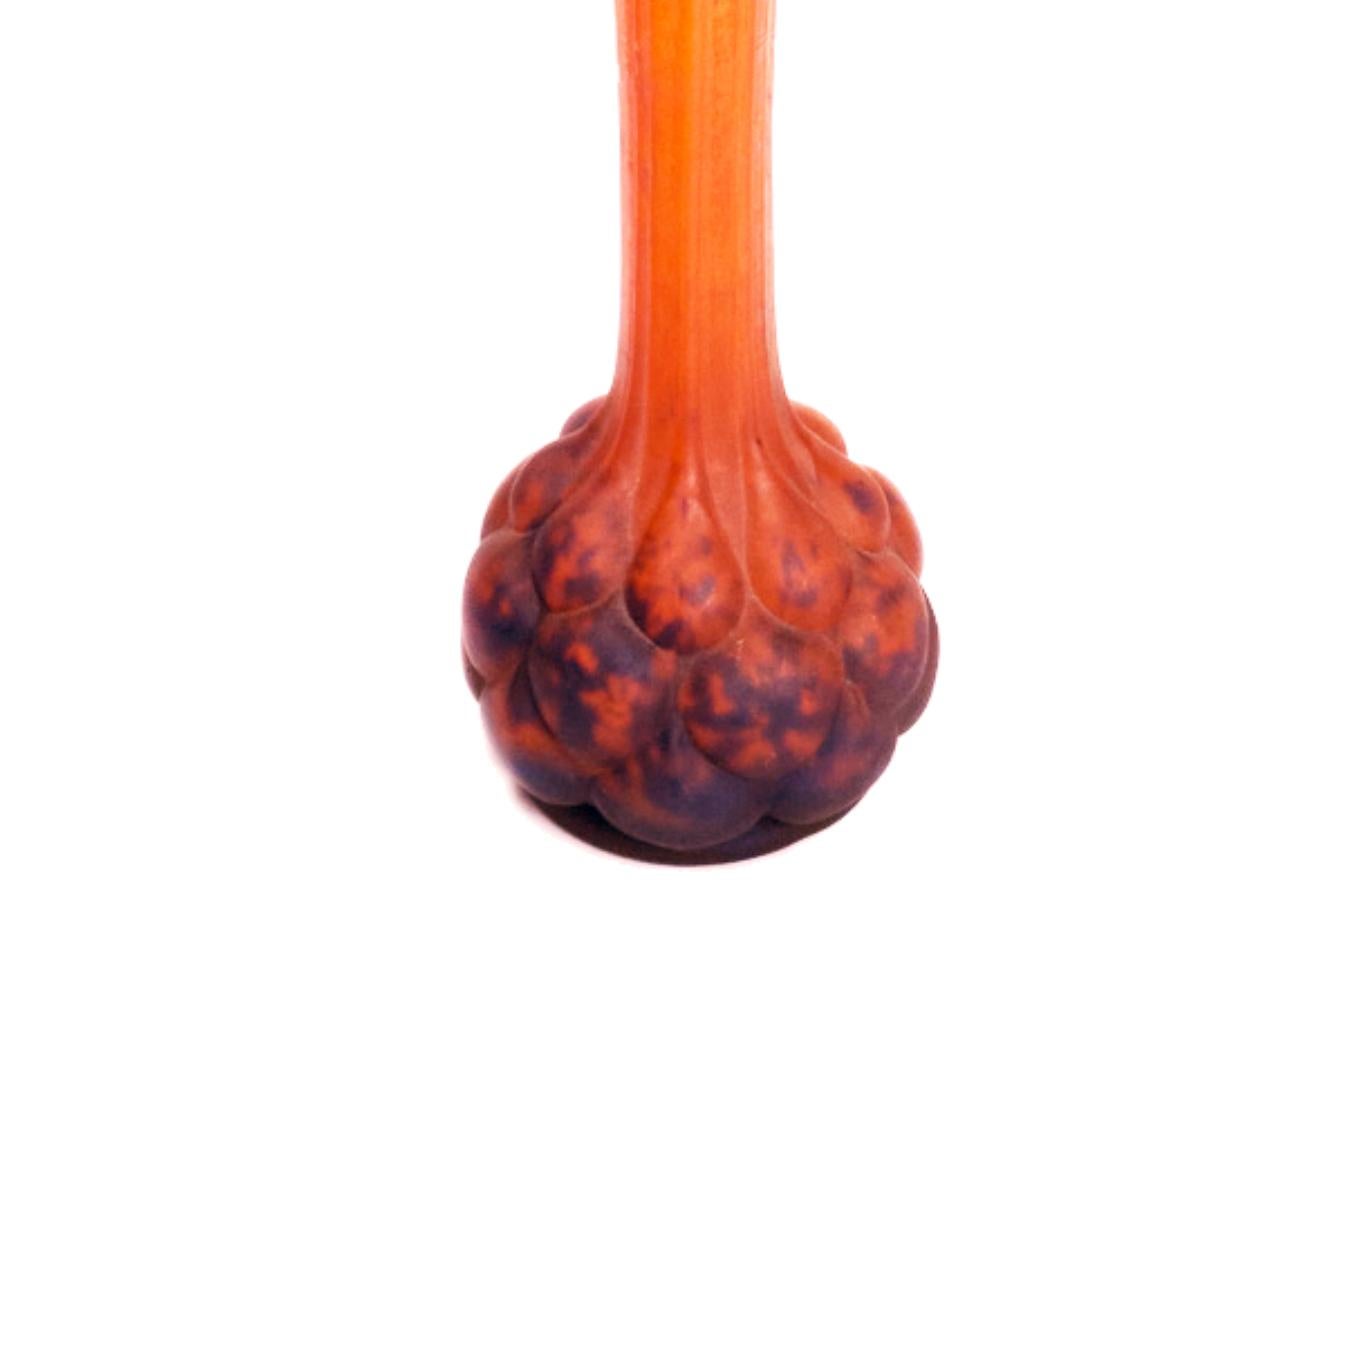 Polychrome 'pâté de verre' soliflore-style vase in blue, orange and purple glass with a ball clustered at the bottom and a thin neck. Piece signed with Nancy's «Lorraine» acid.Glass paste is a multi-layered glass on which an image has been etched